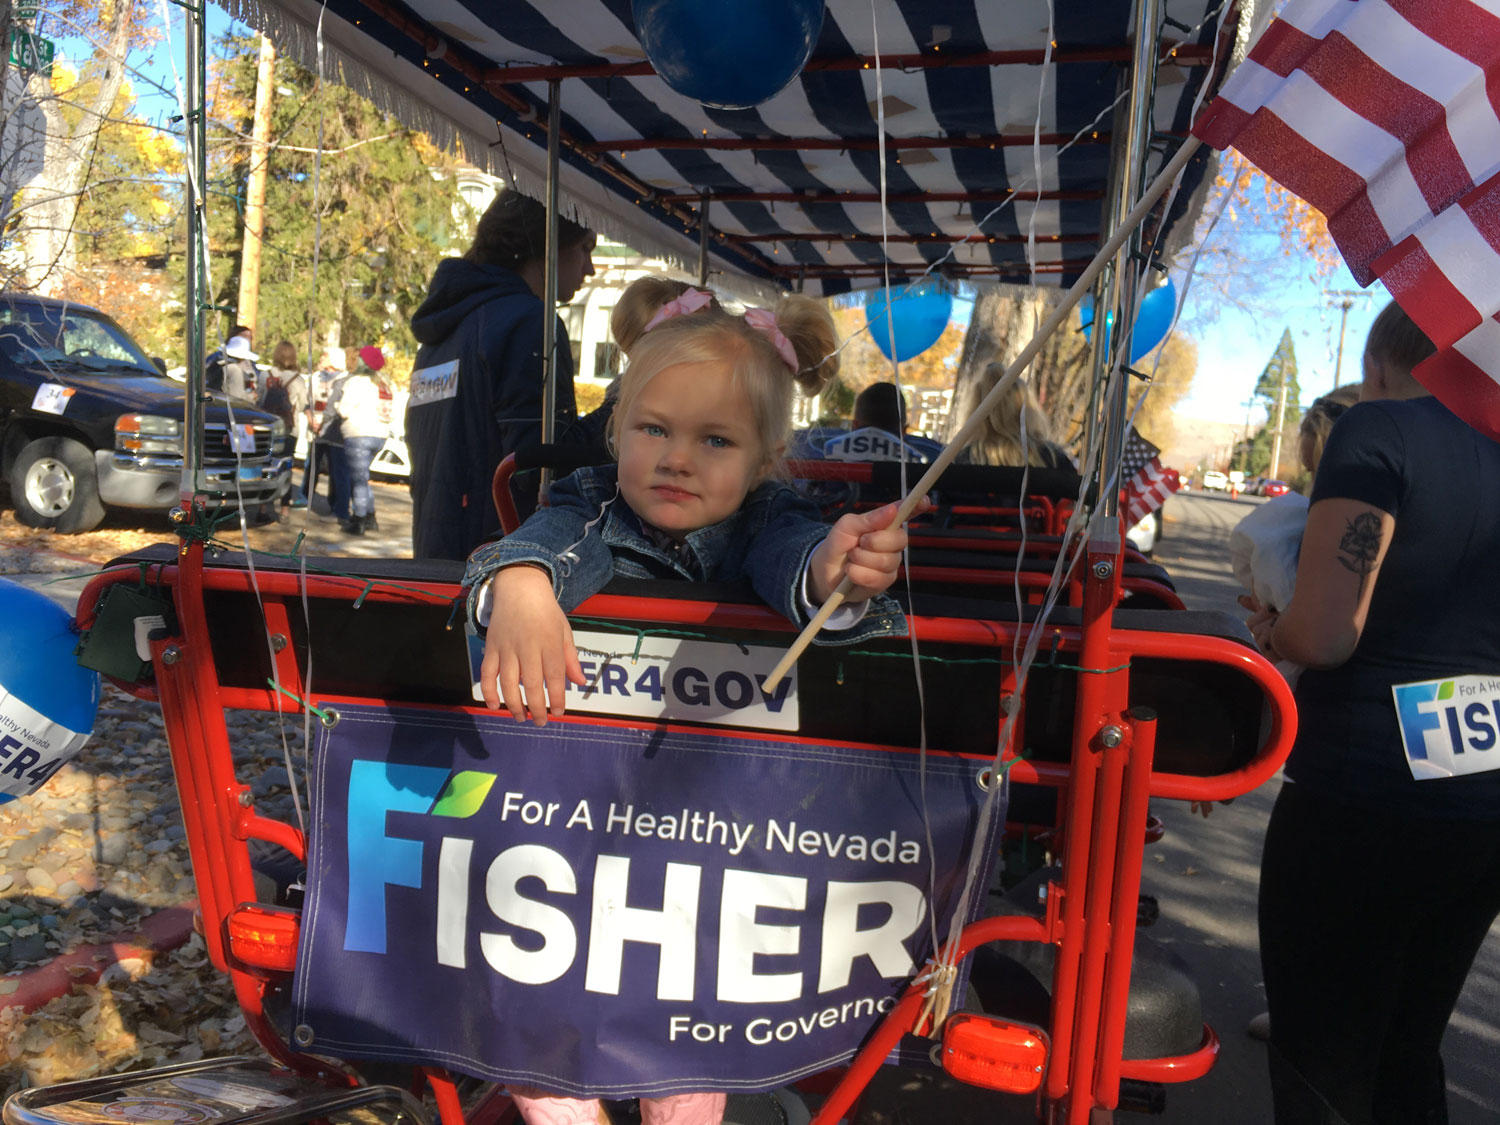 Girl riding on Fisher for Nevada parade float in Carson City